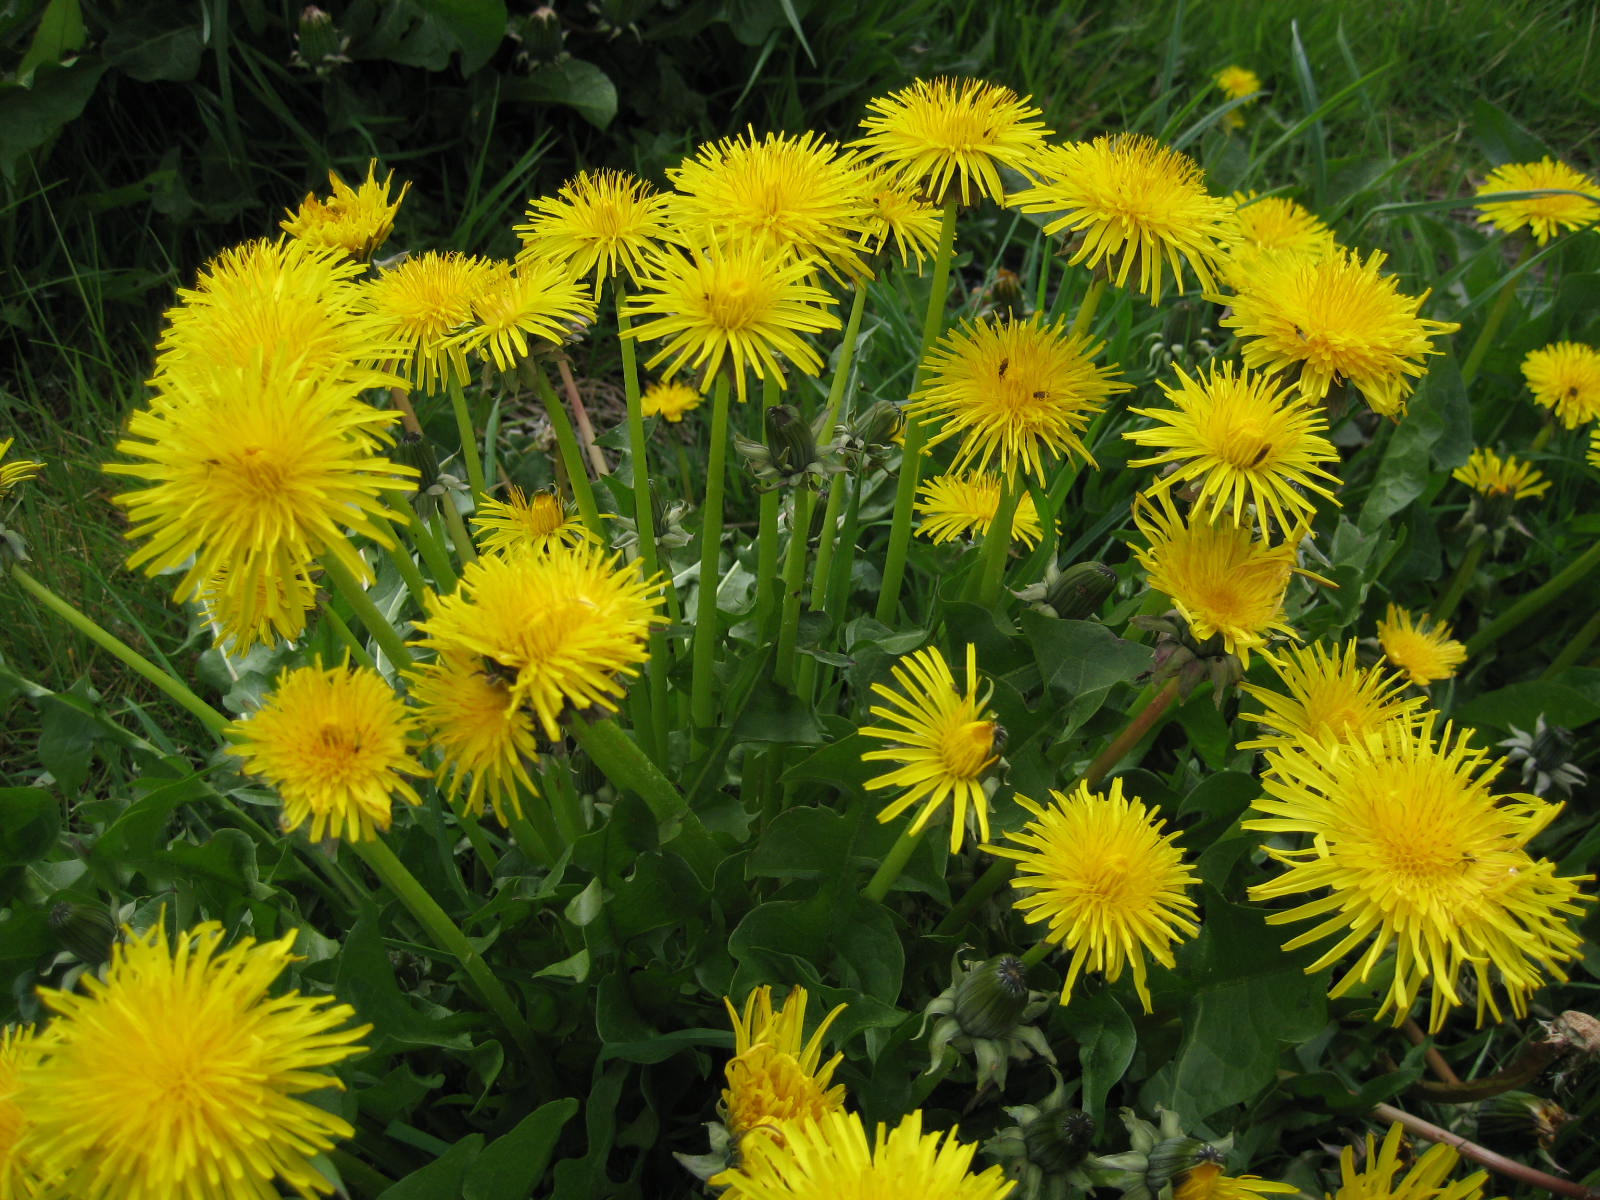 Image: Science confirms the anti-inflammatory effects of a compound found in dandelions